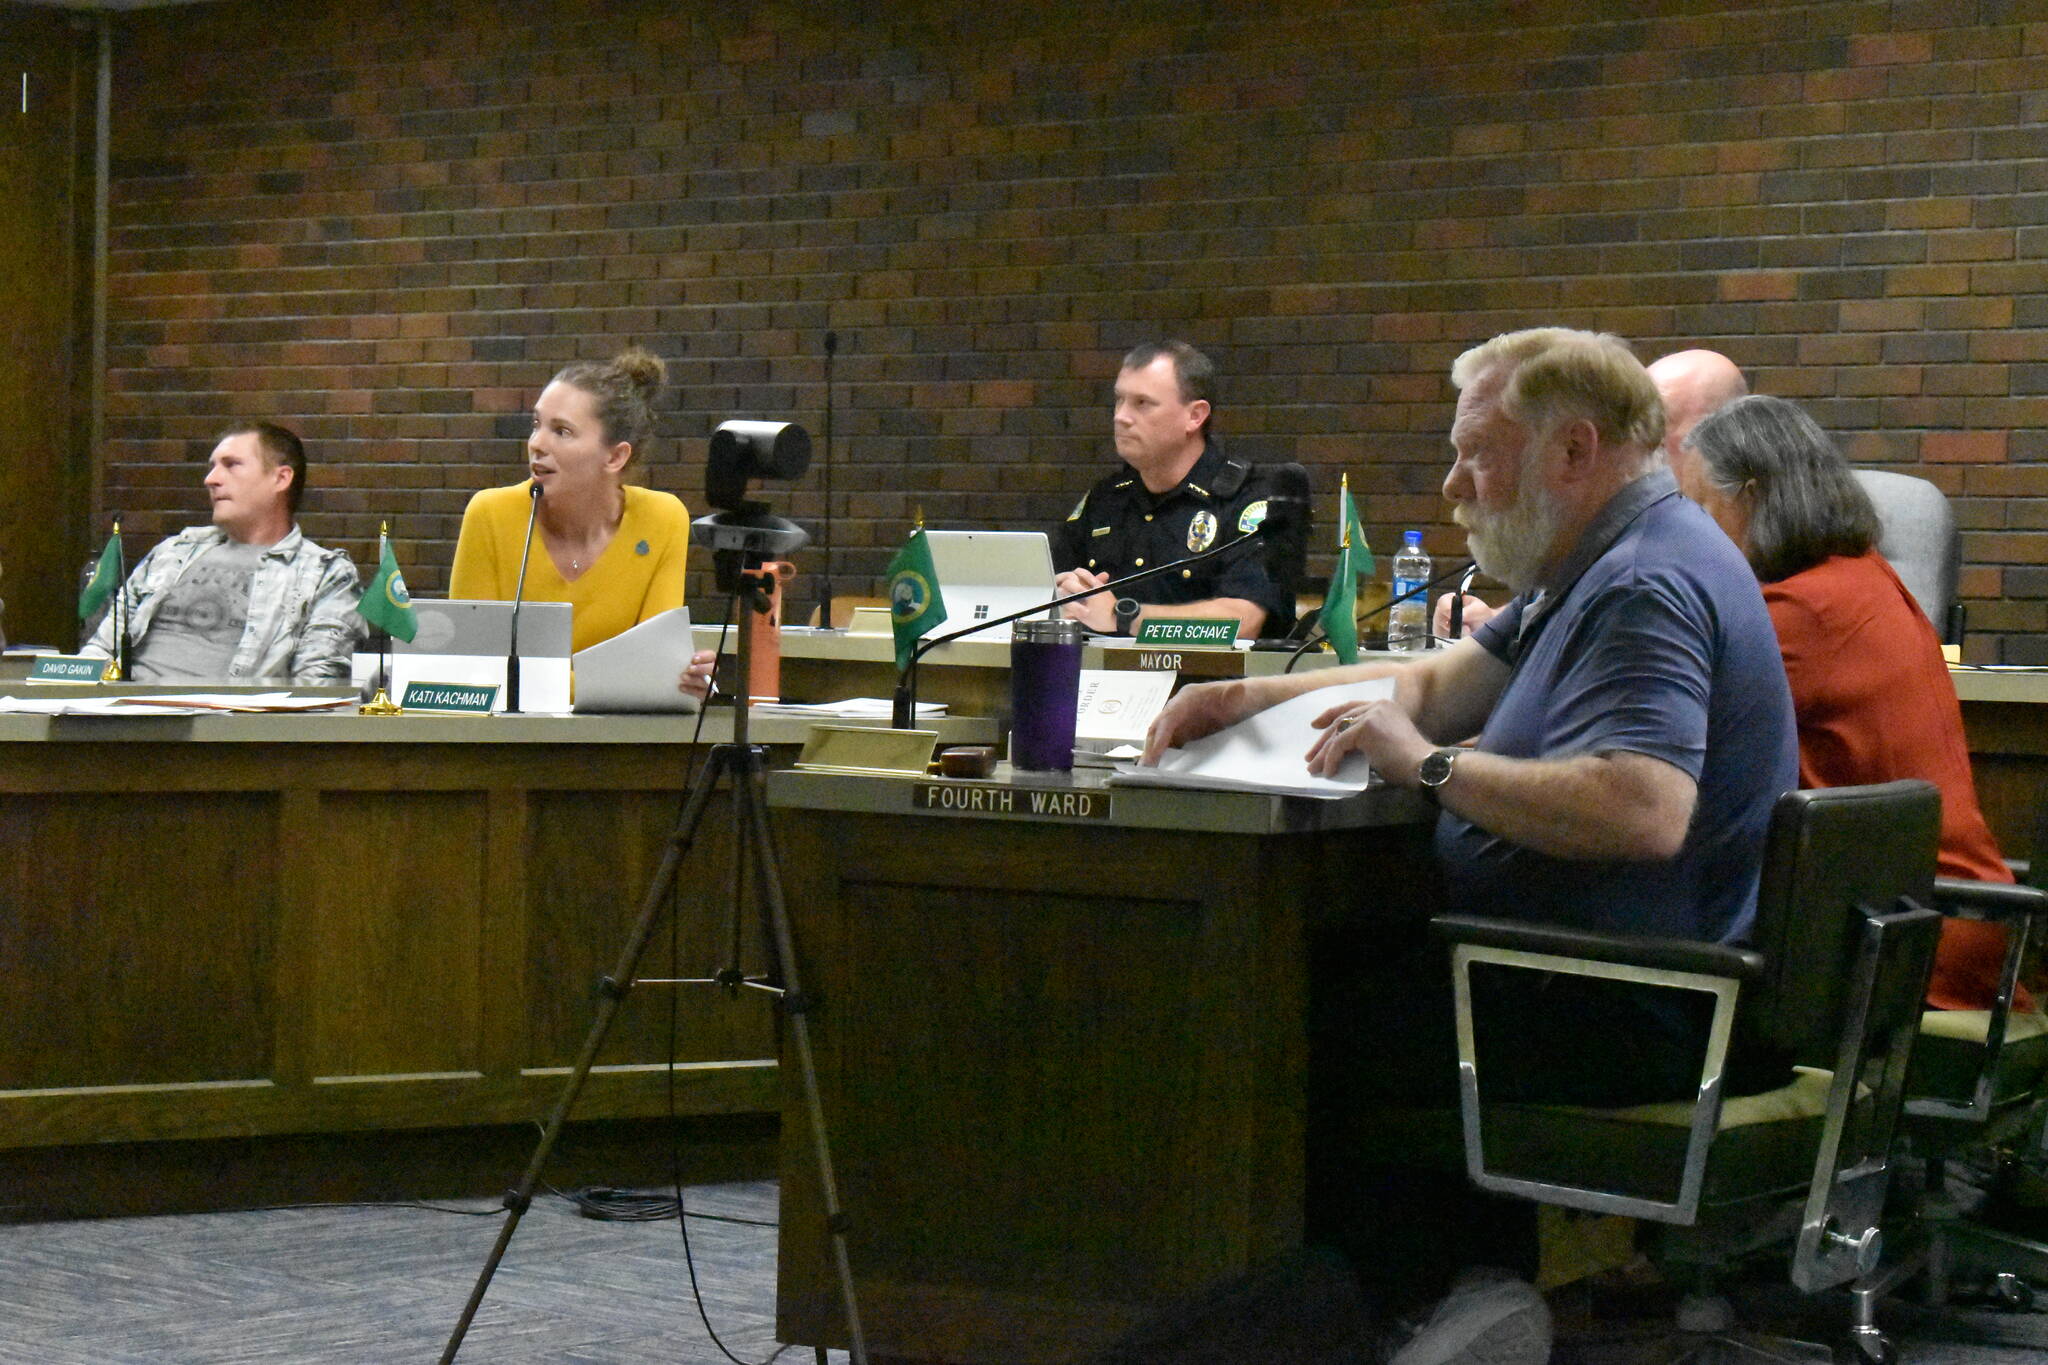 Aberdeen City Council President Kati Kachman speaks Wednesday night, Sept. 28, during the Aberdeen City Council meeting. During the meeting the city council voted for $7 million to be uncommitted from the Gateway Center project. (Matthew N. Wells | The Daily World)